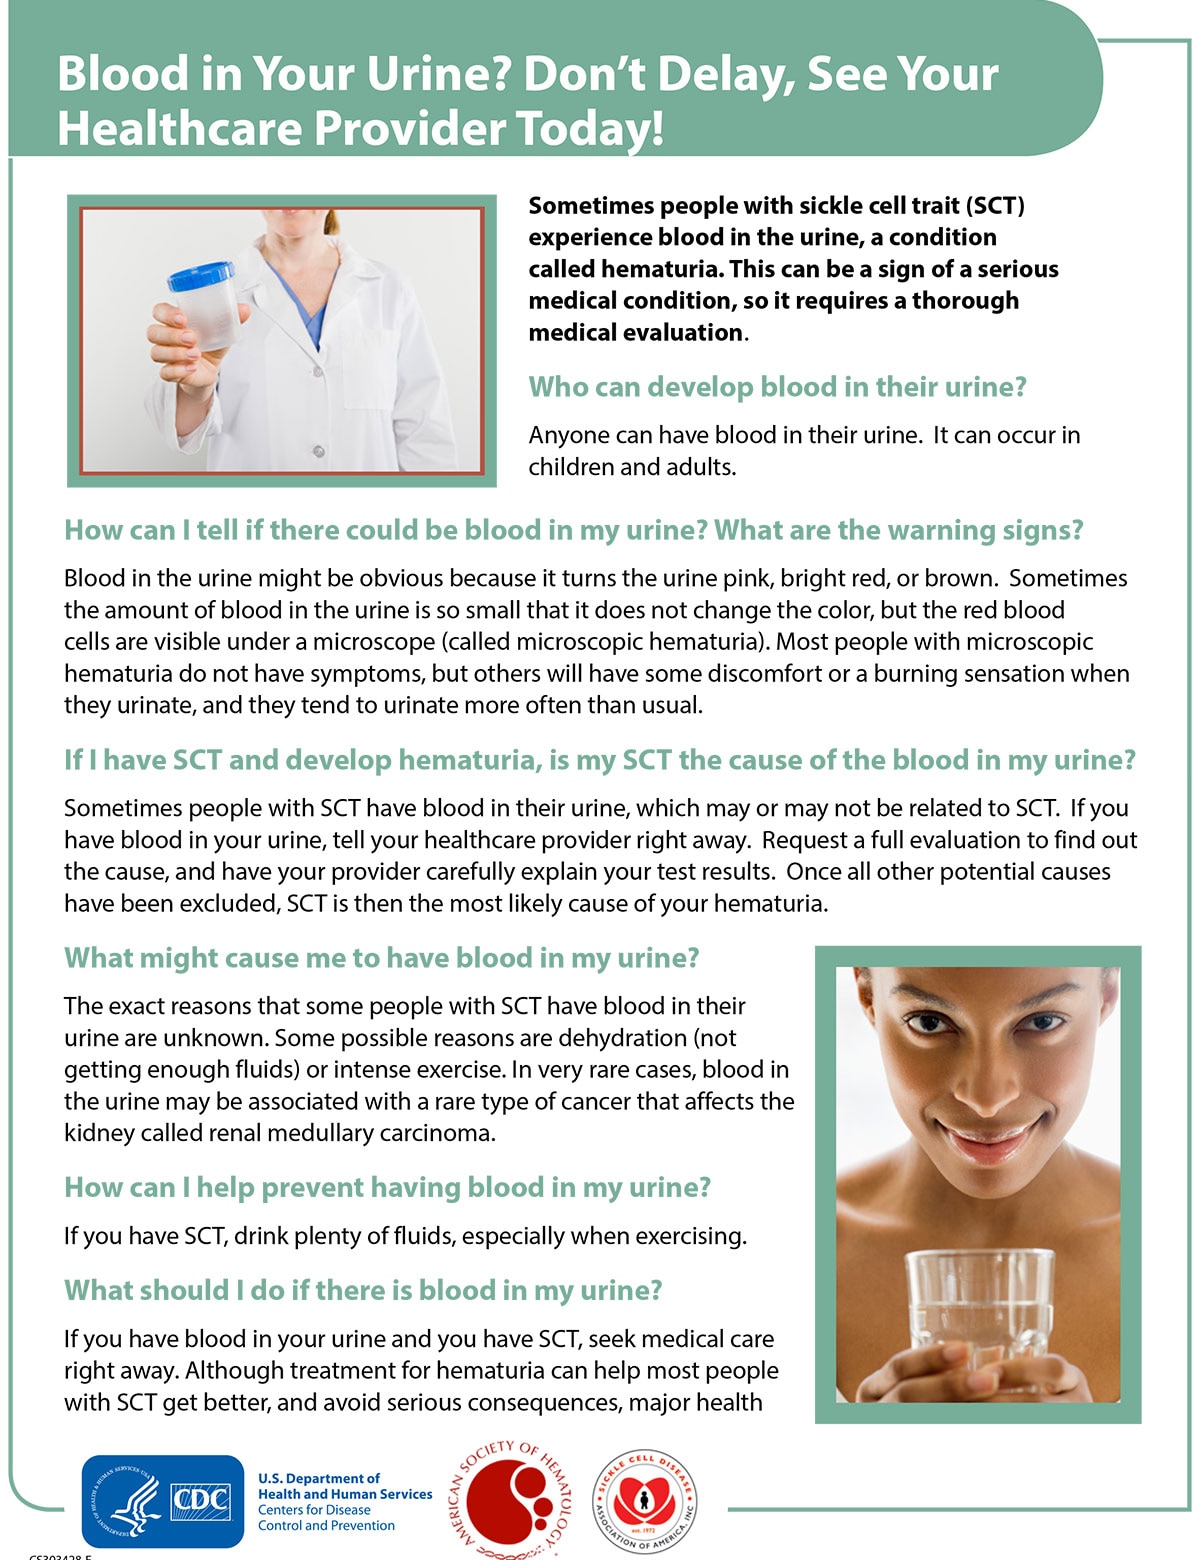 Blood in Your Urine? Don’t Delay, See Your Healthcare Provider Today! Fact sheet image thumbnail